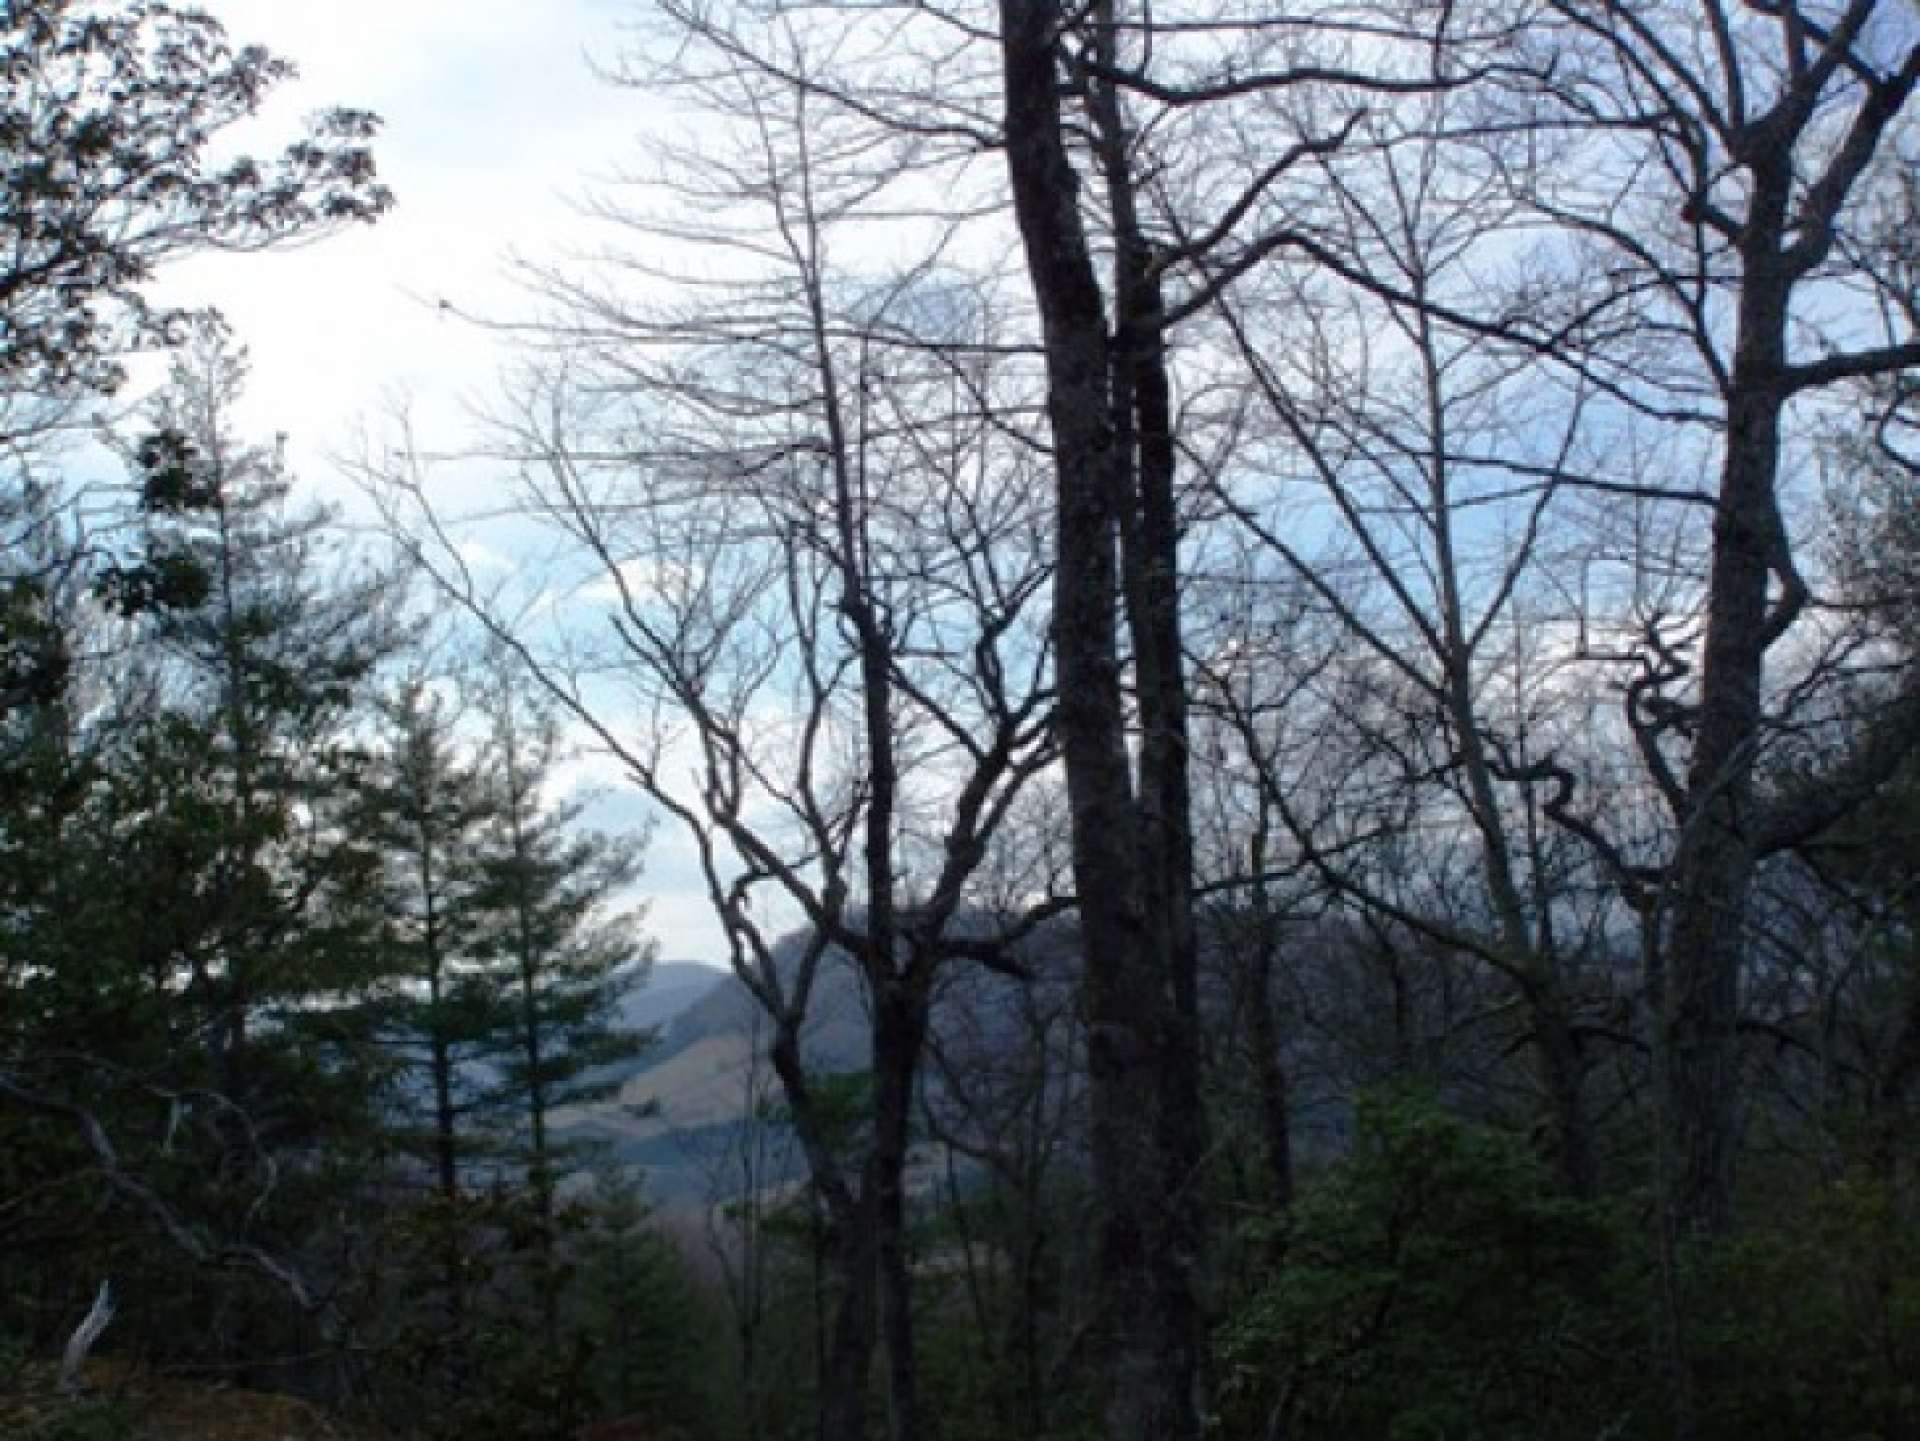 Lot 6 is a beautifully wooded 1.20 acre homesite boasting  nice seasonal views.  Offered at only $24,900, this lot will be a great option for those looking for a peaceful building site for their forever home or cool NC Mountain retreat cabin.